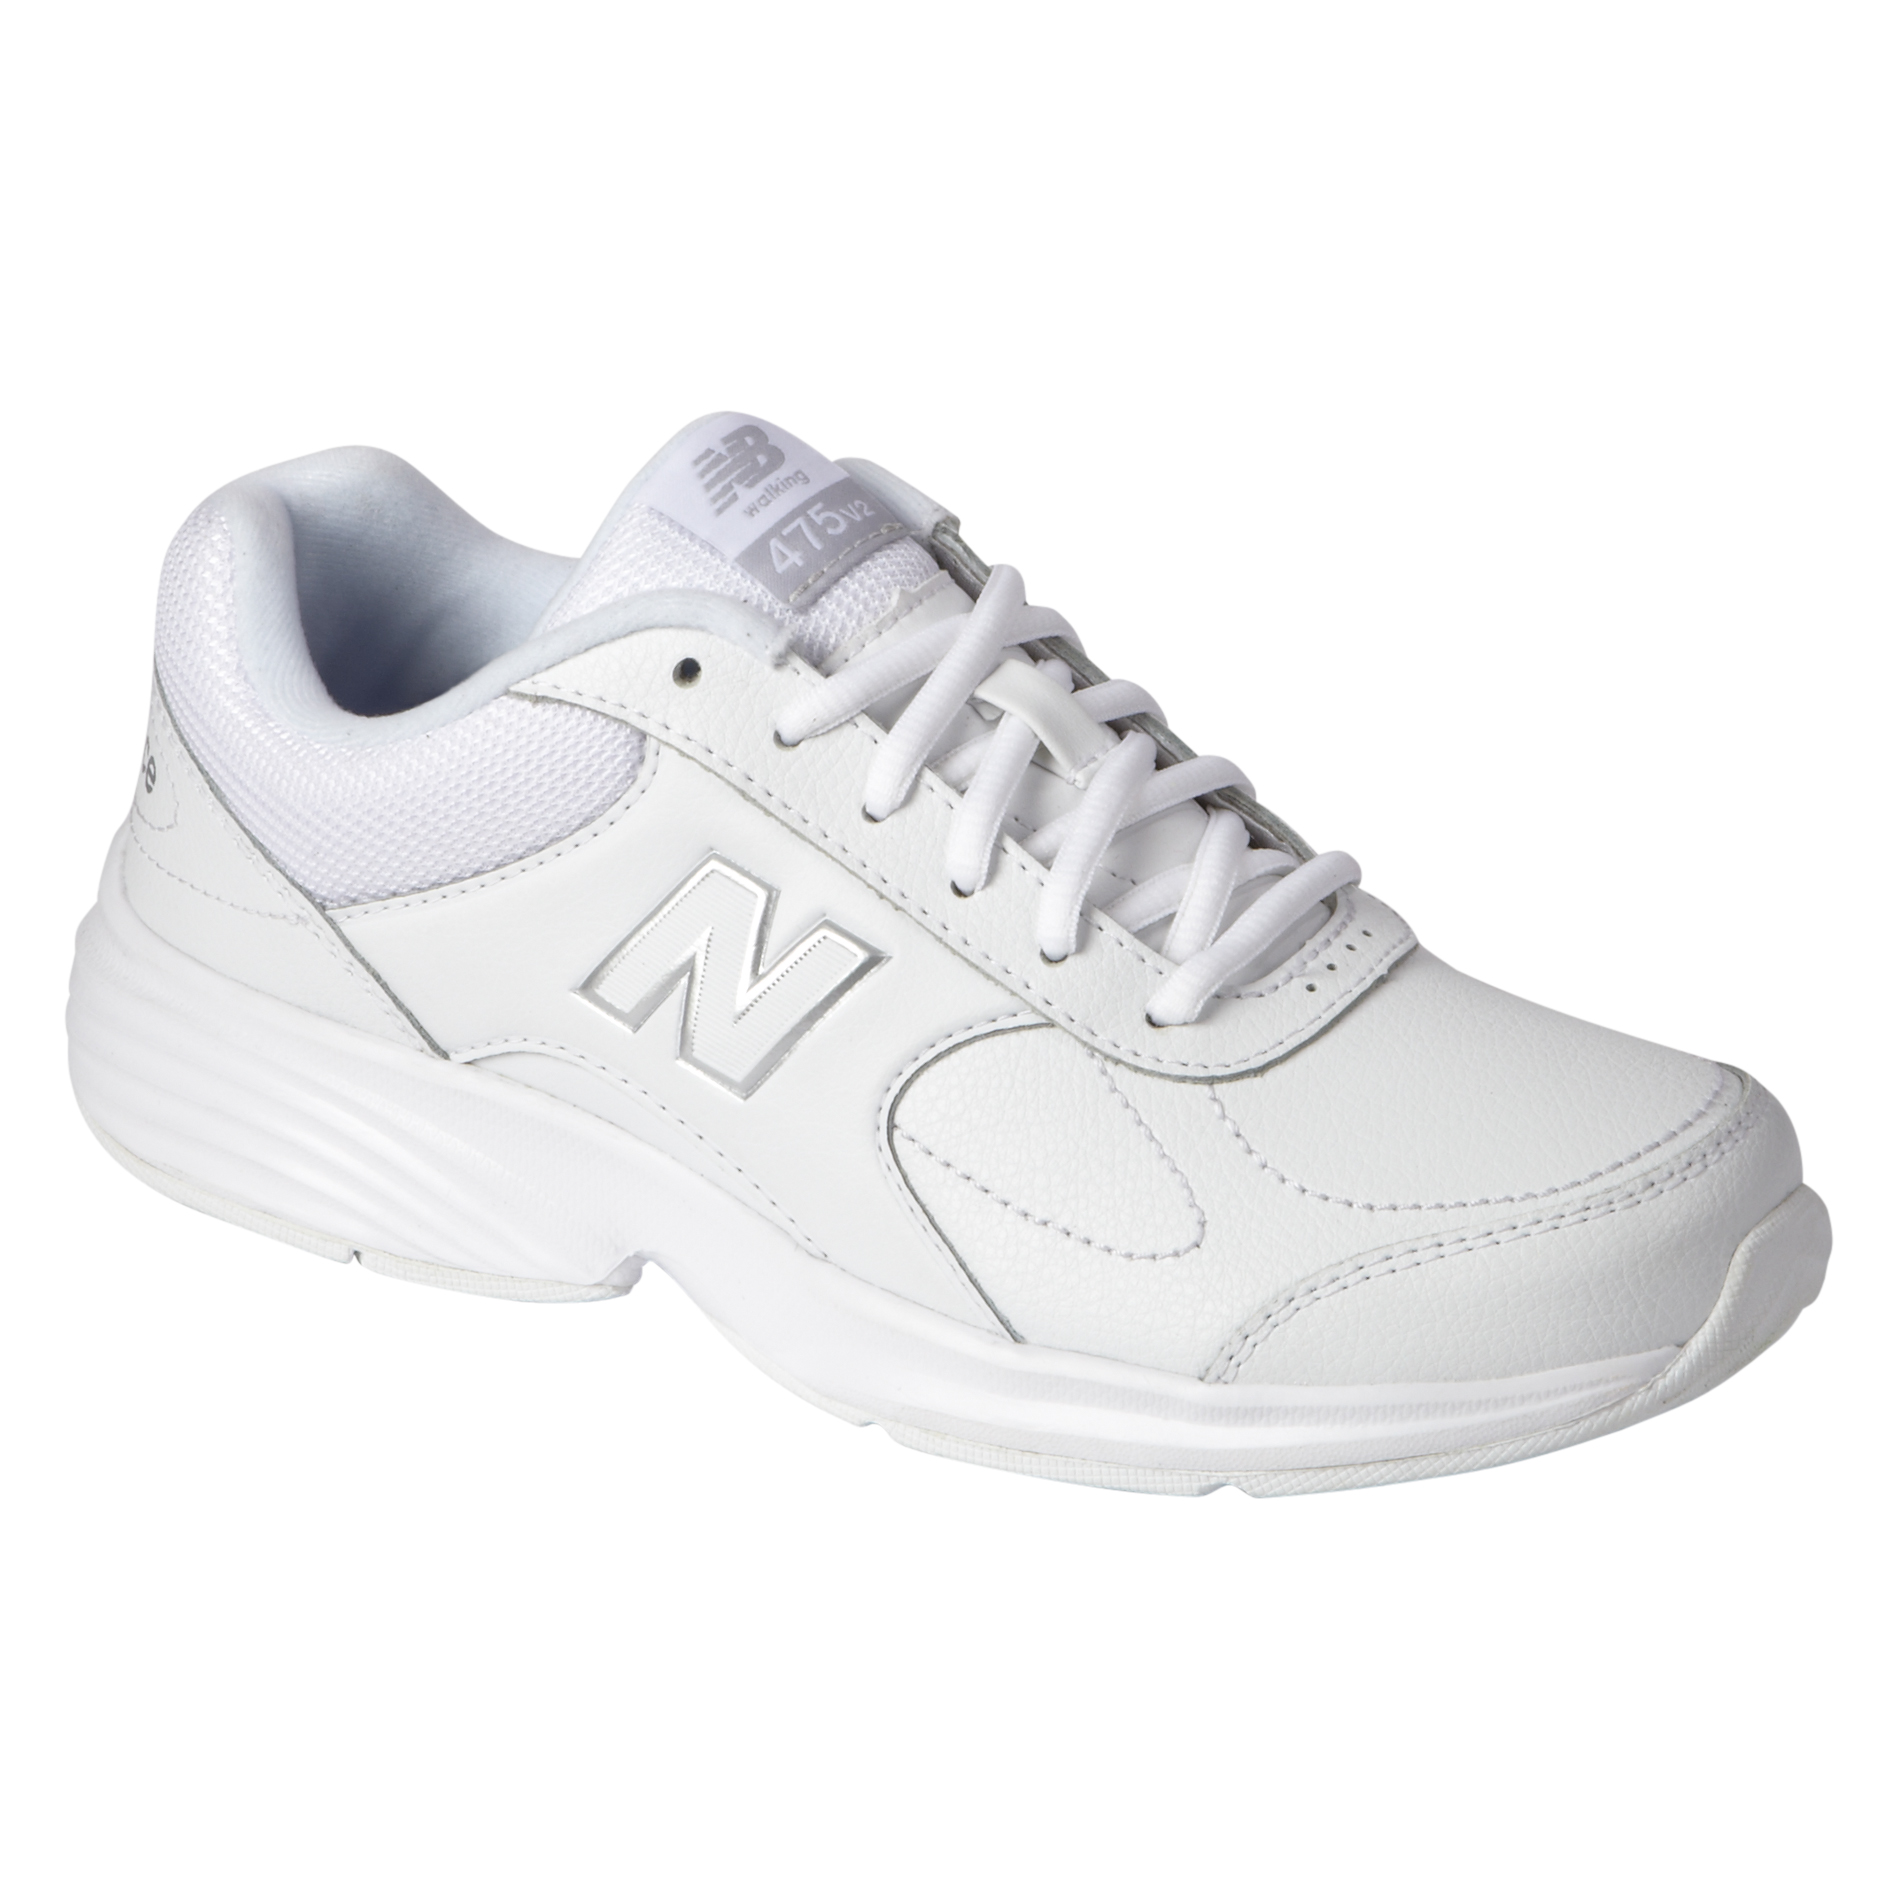 new balance orthopedic shoes,Save up to 19%,www.ilcascinone.com